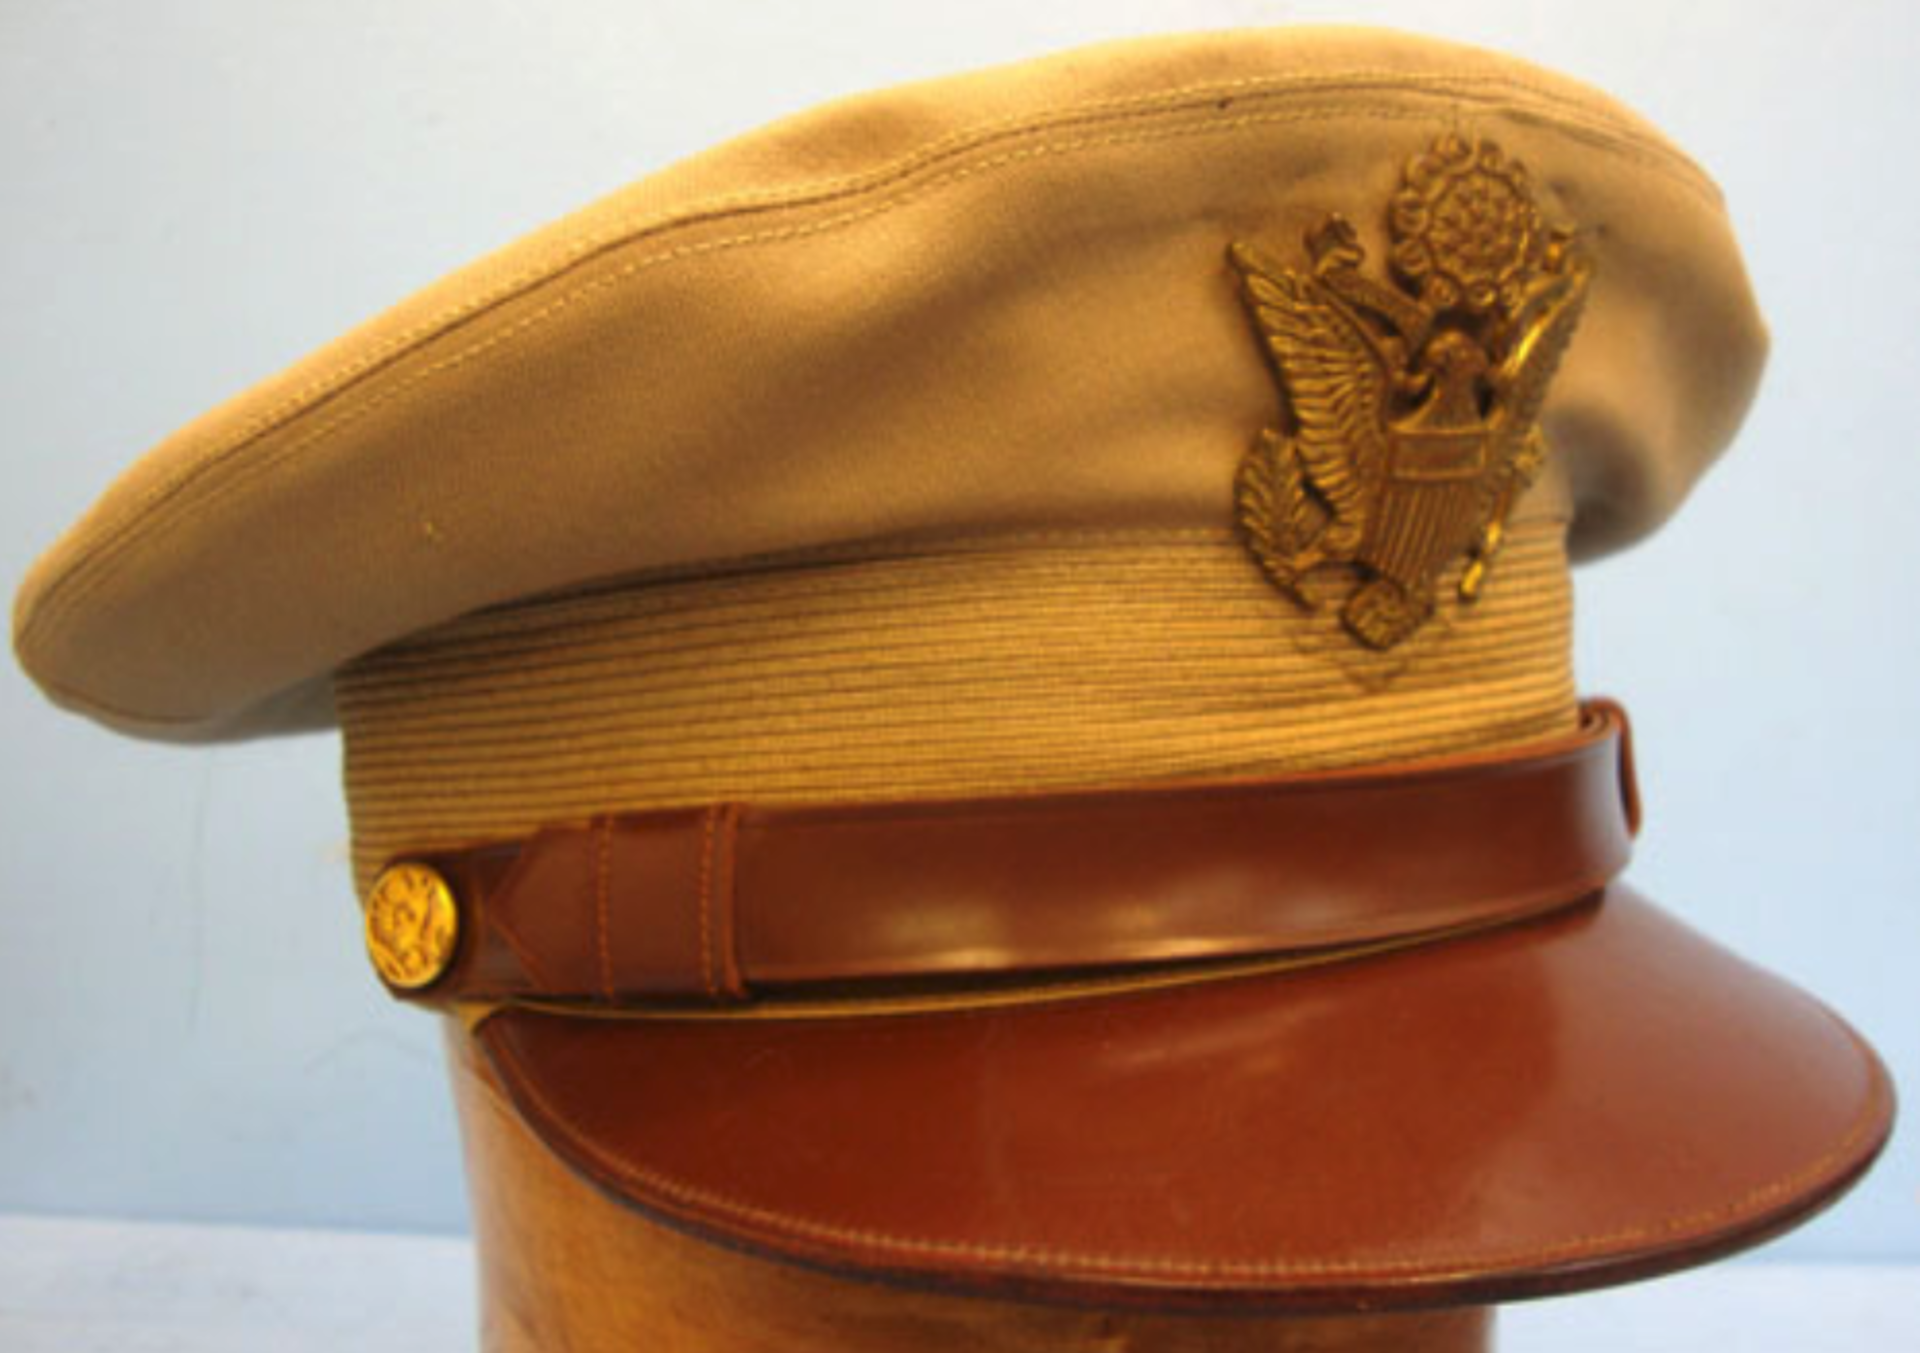 WW2 1943 USAAF Officer's Tropical Peaked Cap, Size 7 1/4"